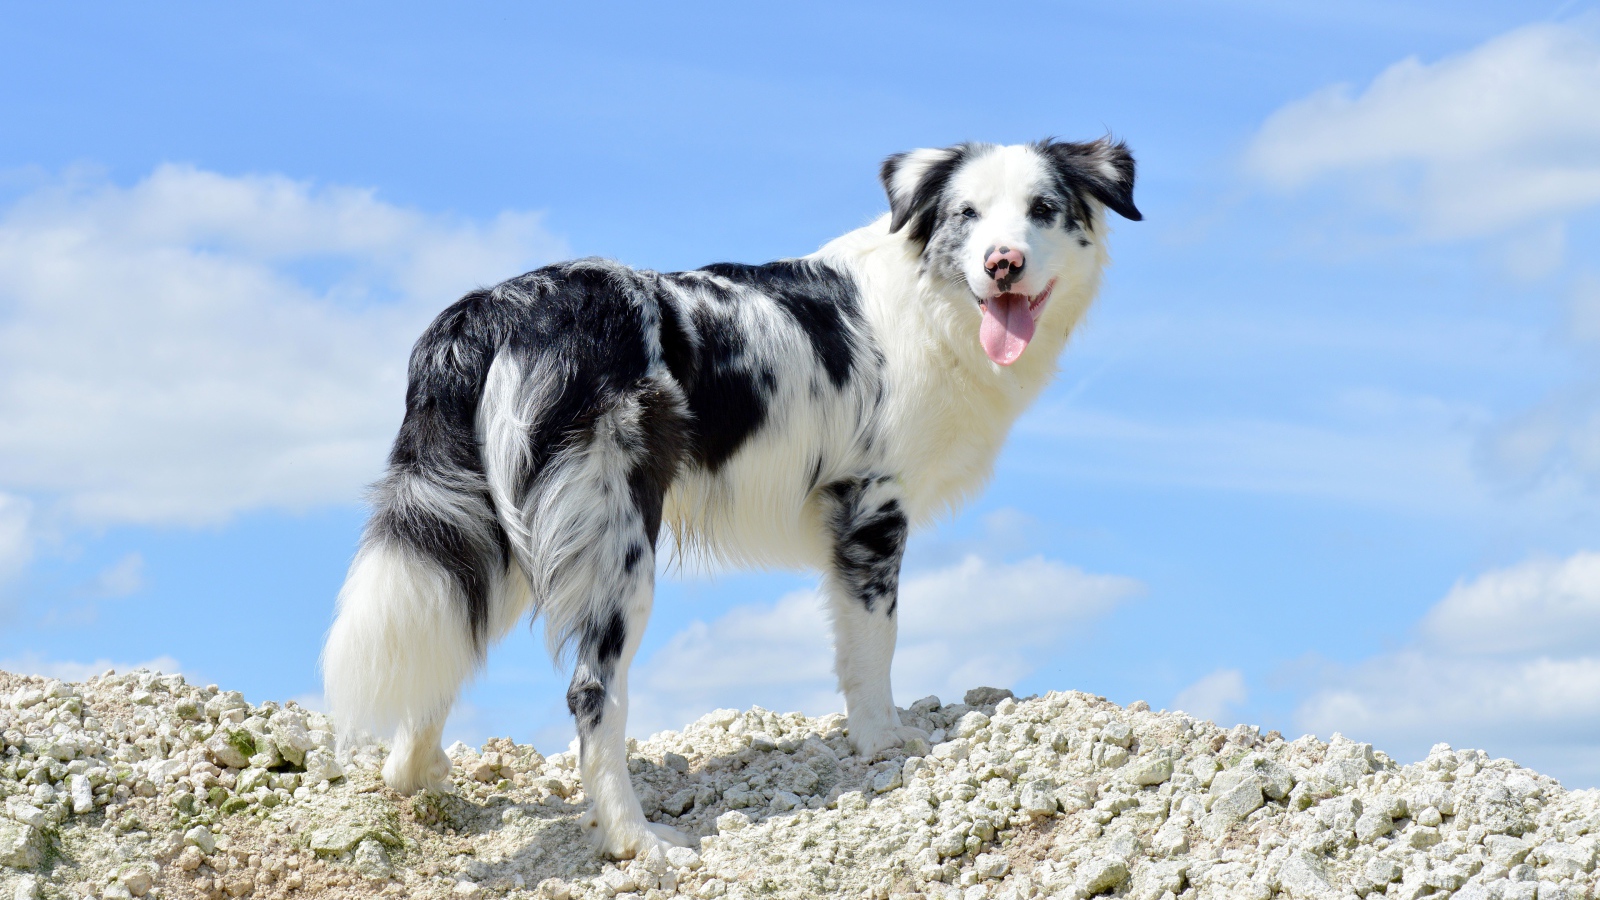 Australian Shepherd with tongue hanging out against the sky